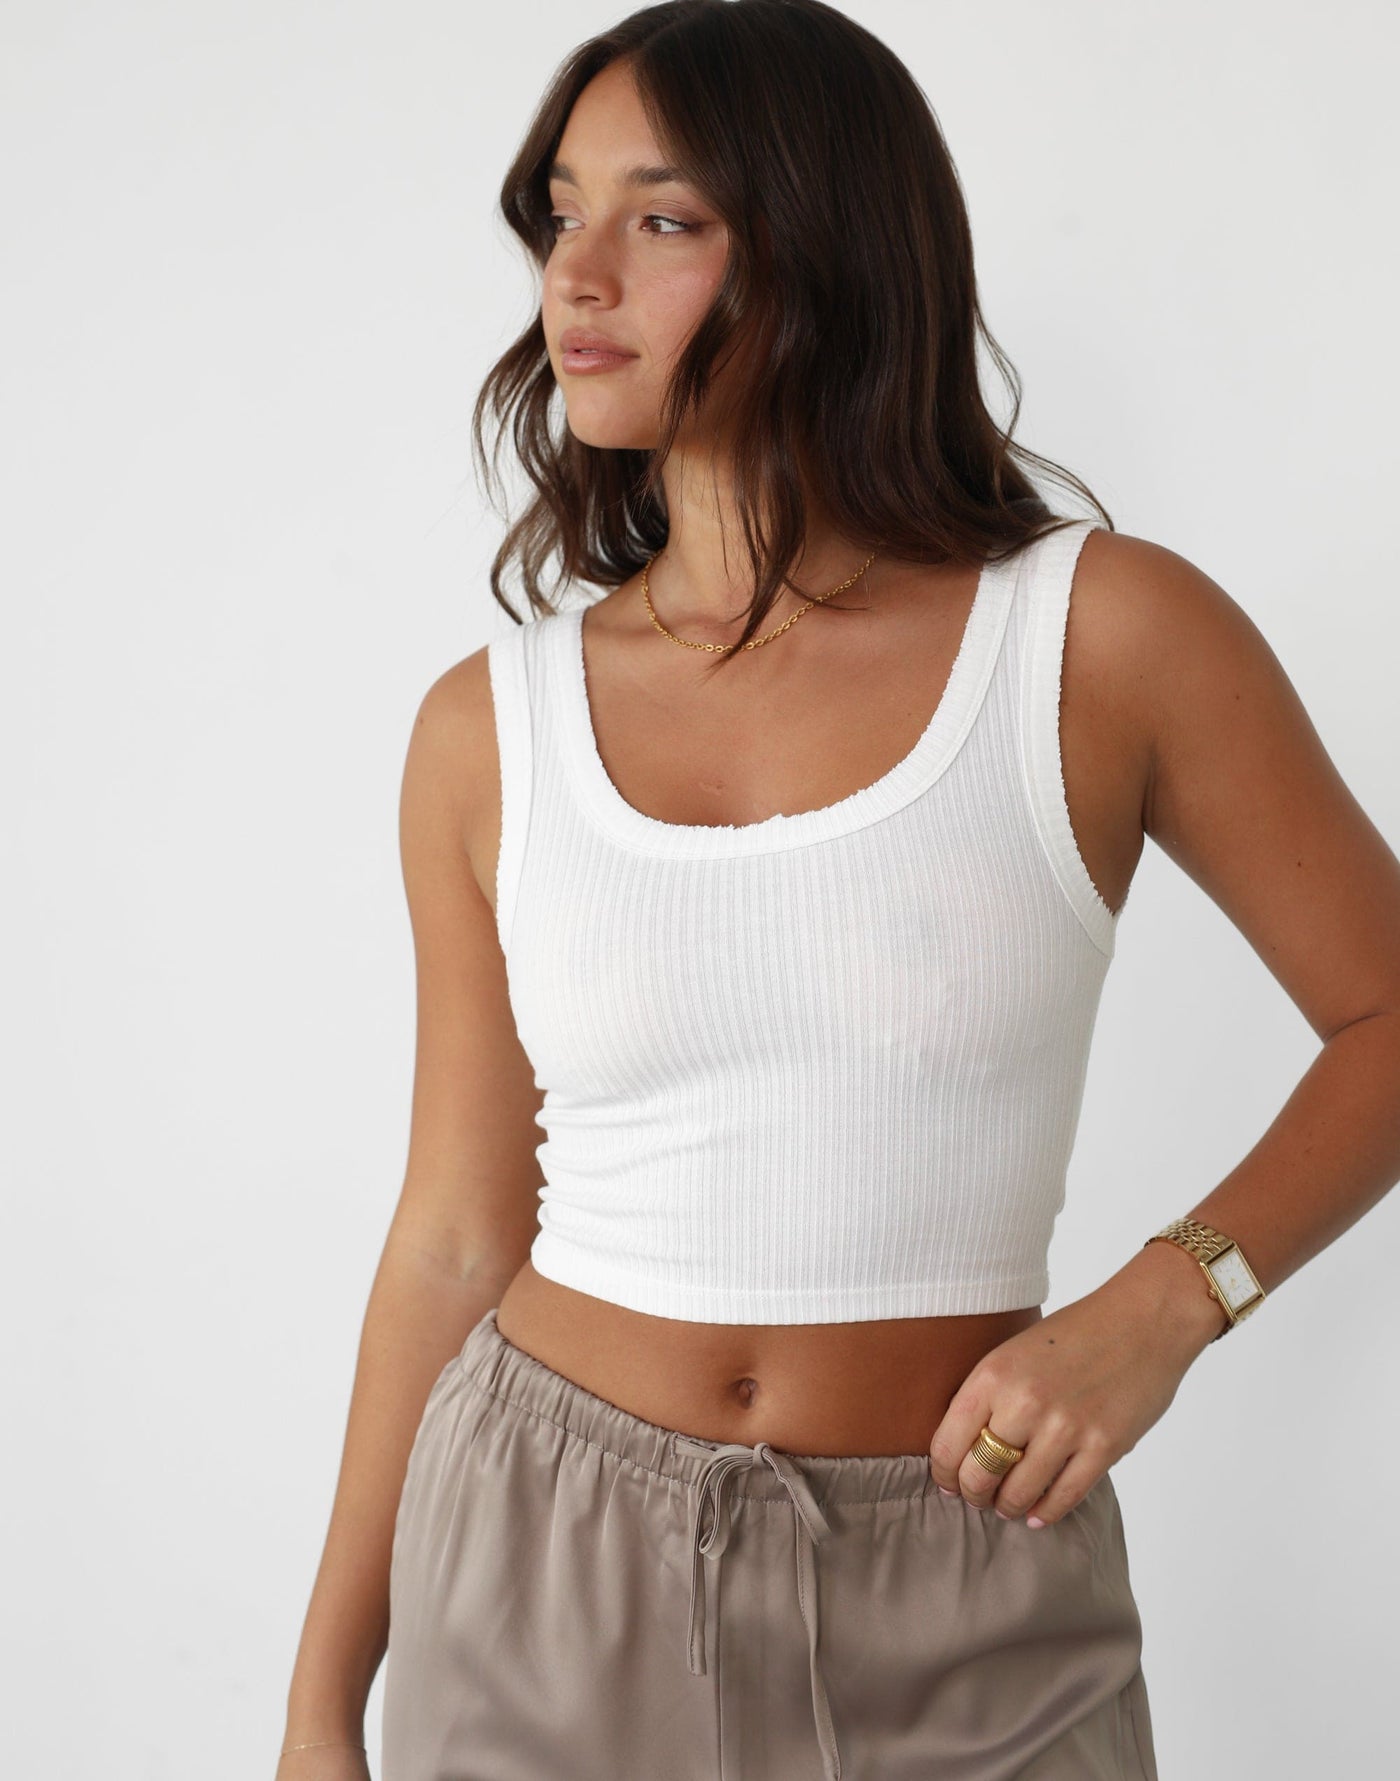 Eleyna Crop Top (White) | White Basic Crop Top - Women's Top - Charcoal Clothing